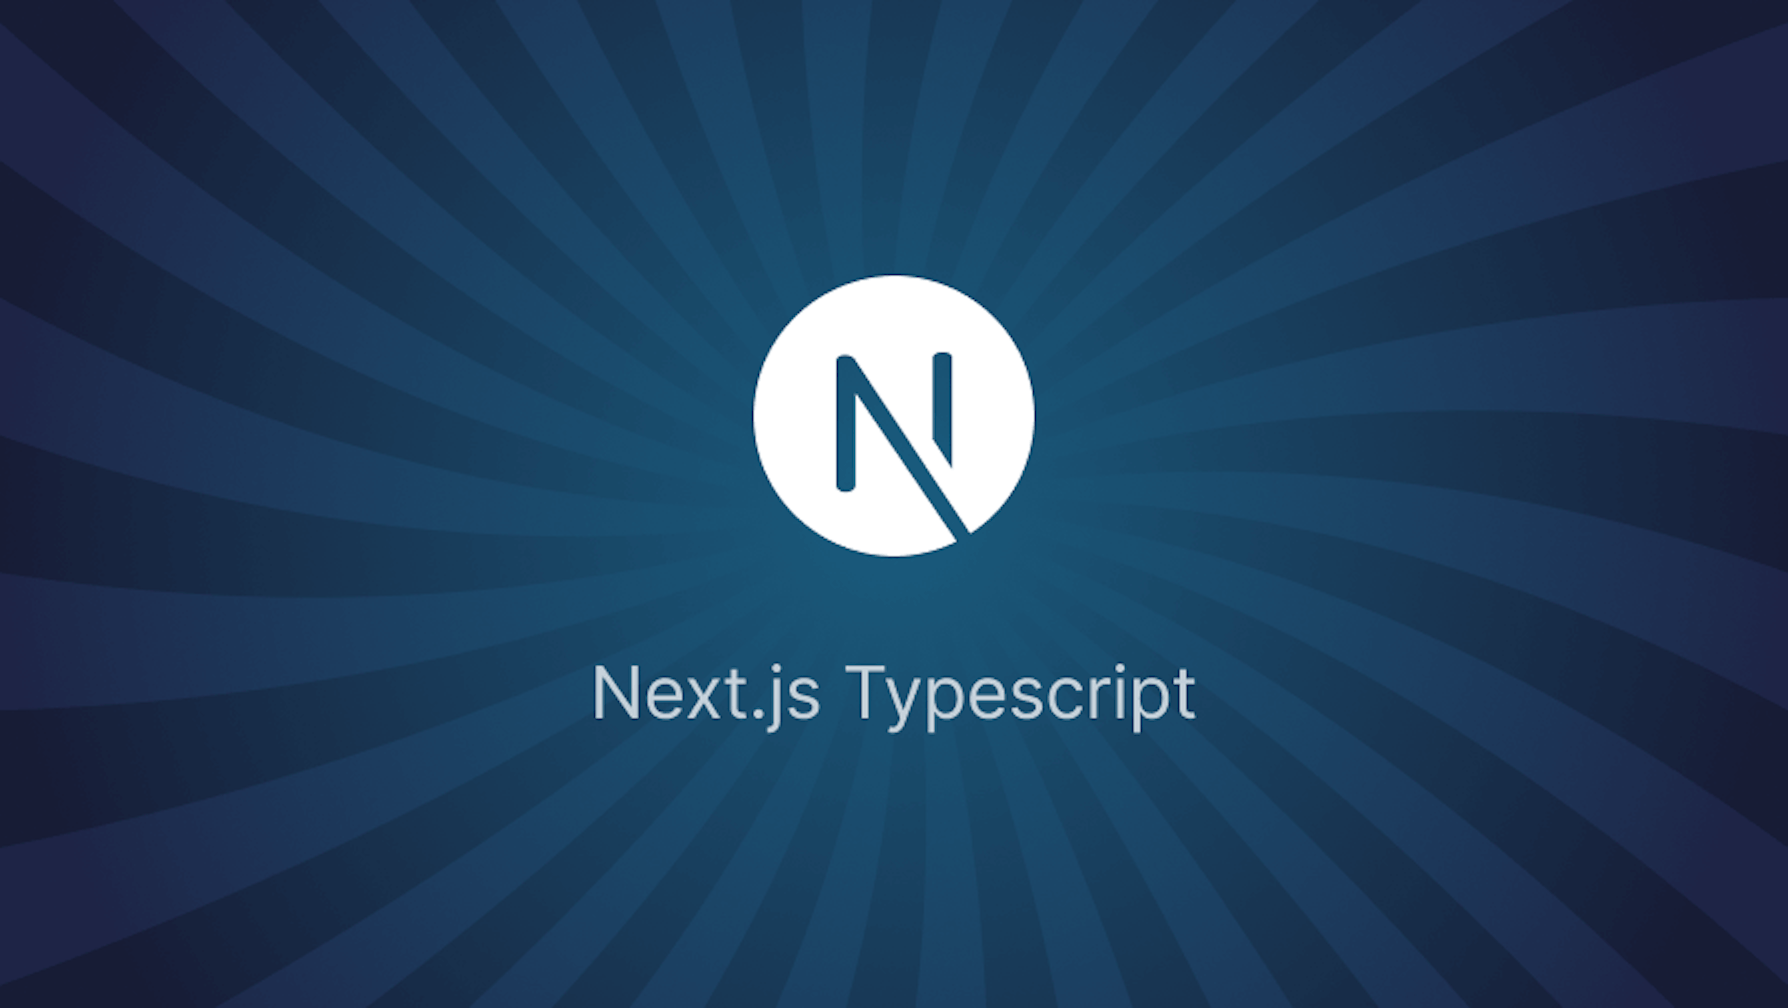 A Guide for Next.js with TypeScript